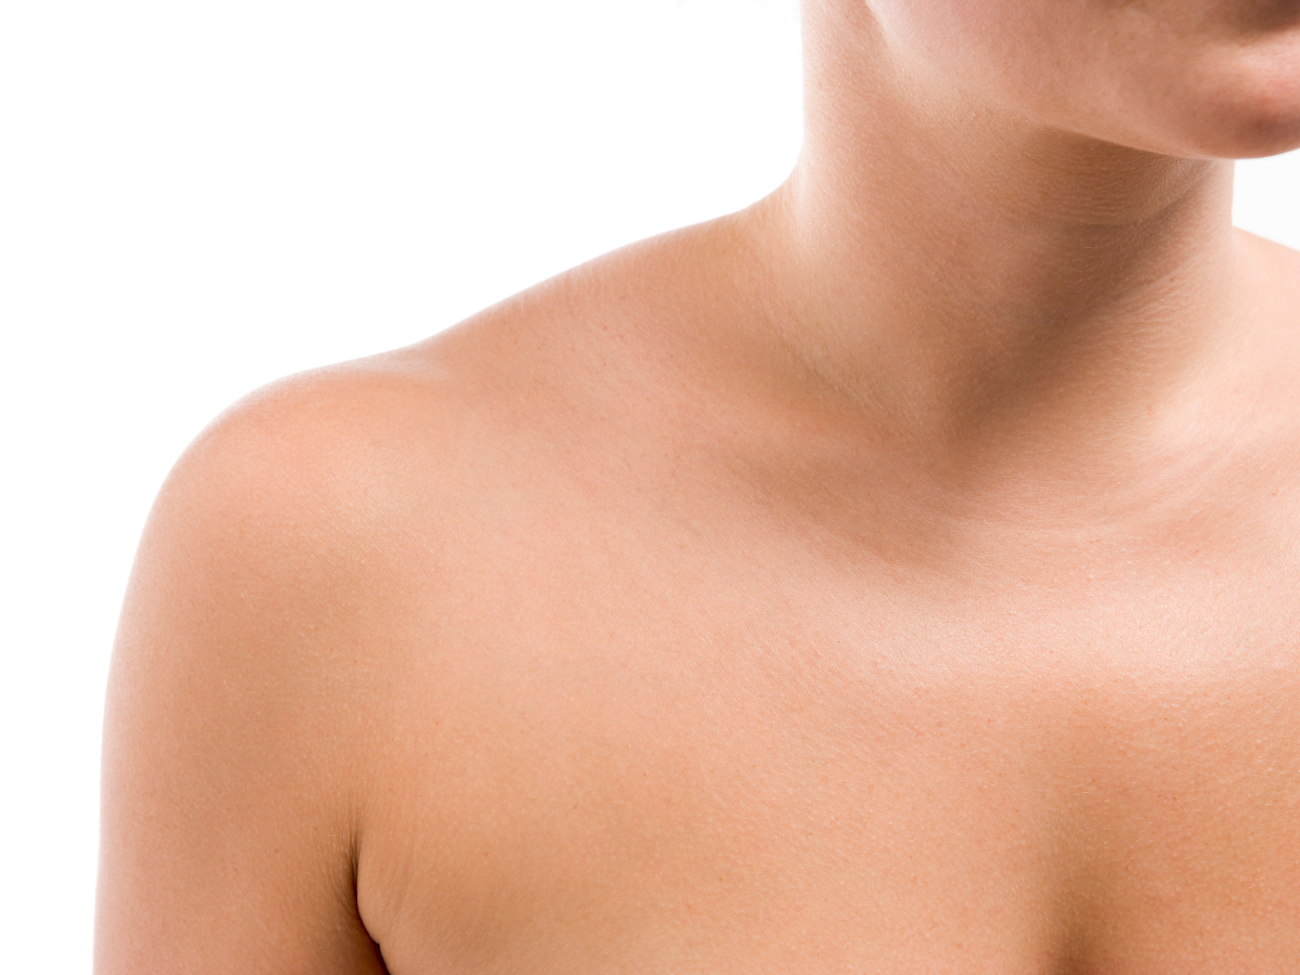 Keloid Scars Treatment: A Guide to Steroid Injections